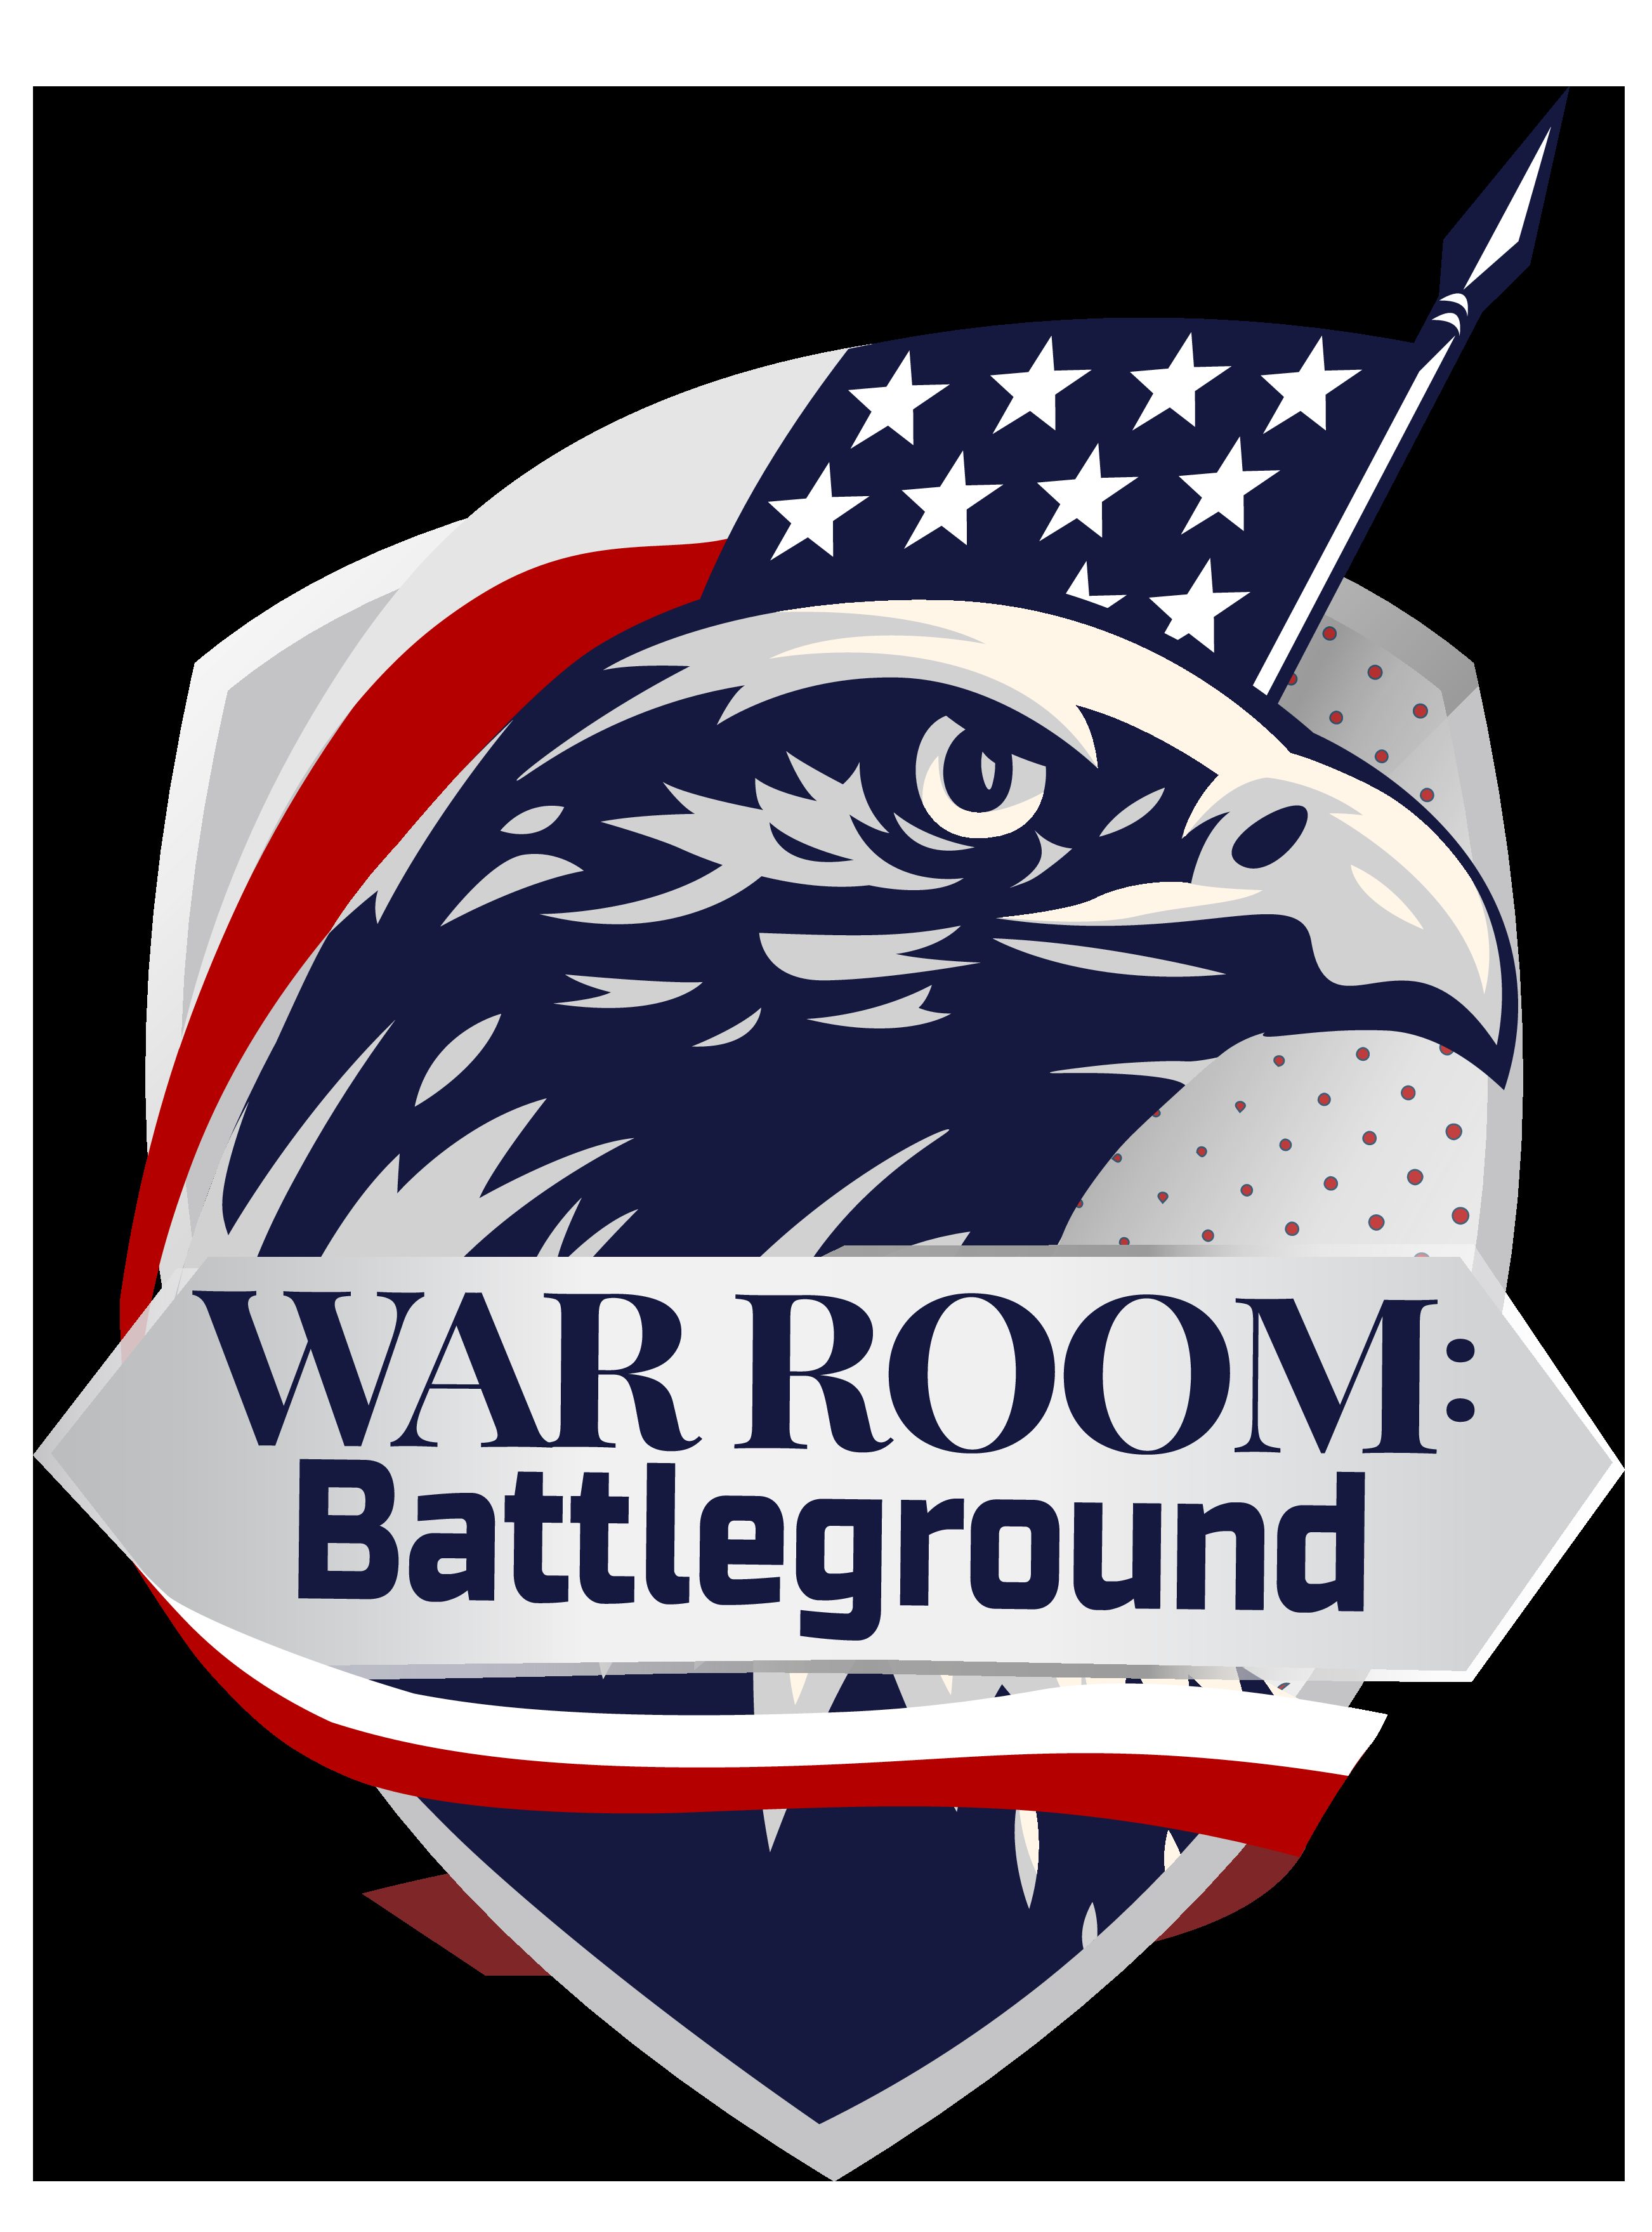 WarRoom Battleground EP 235: Lack Of Responsibility And The Abandoning Of Ohioans